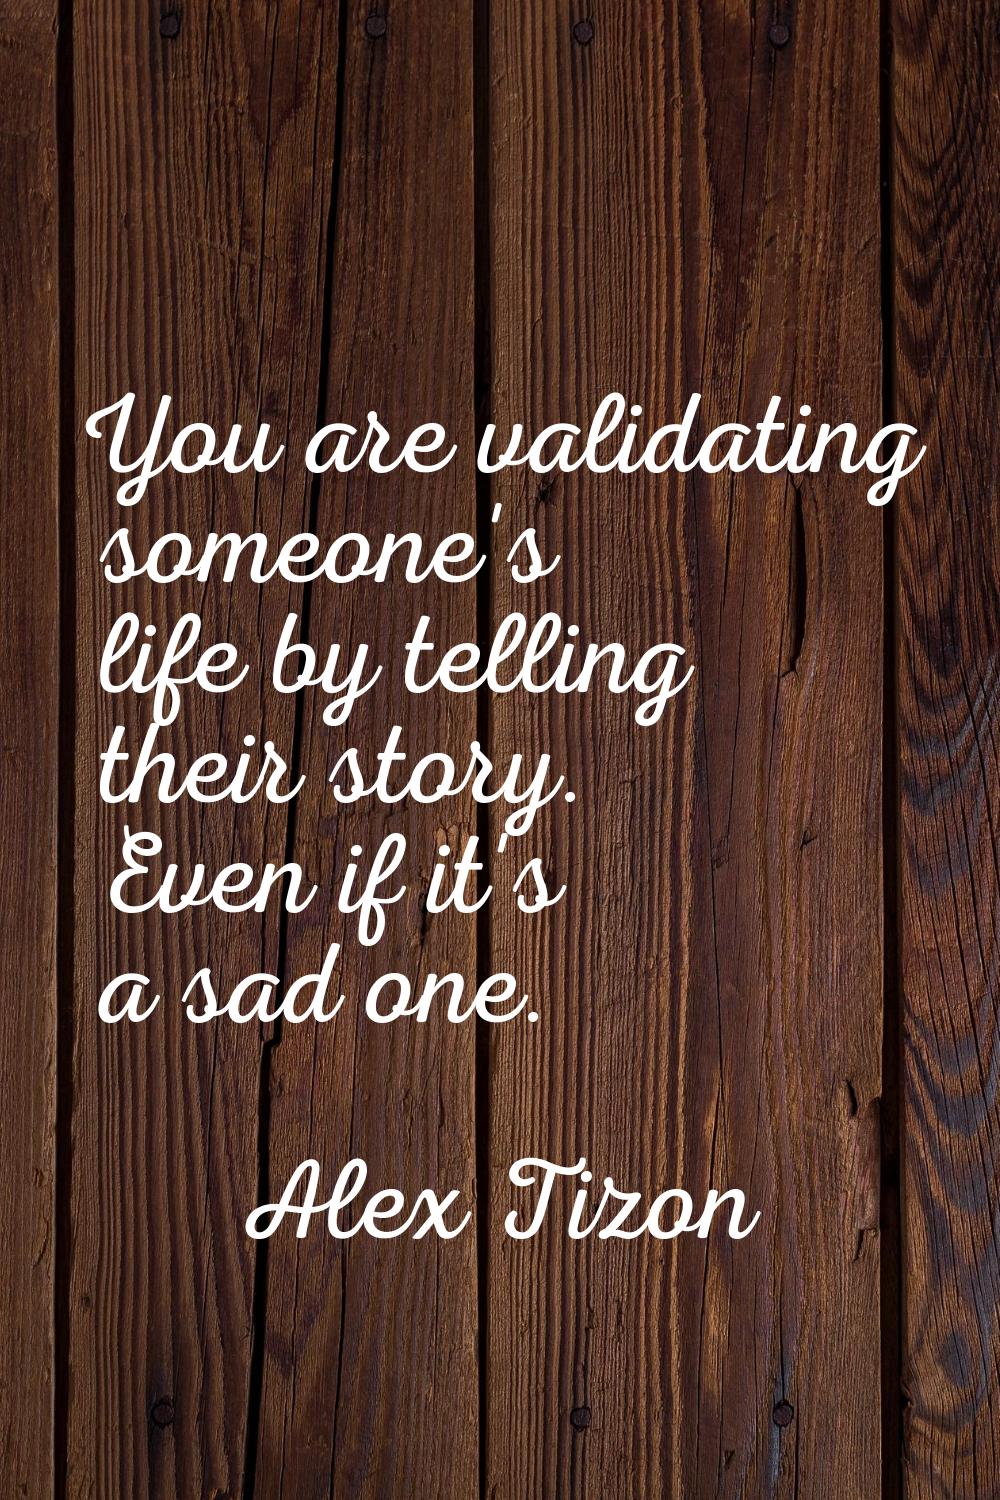 You are validating someone's life by telling their story. Even if it's a sad one.